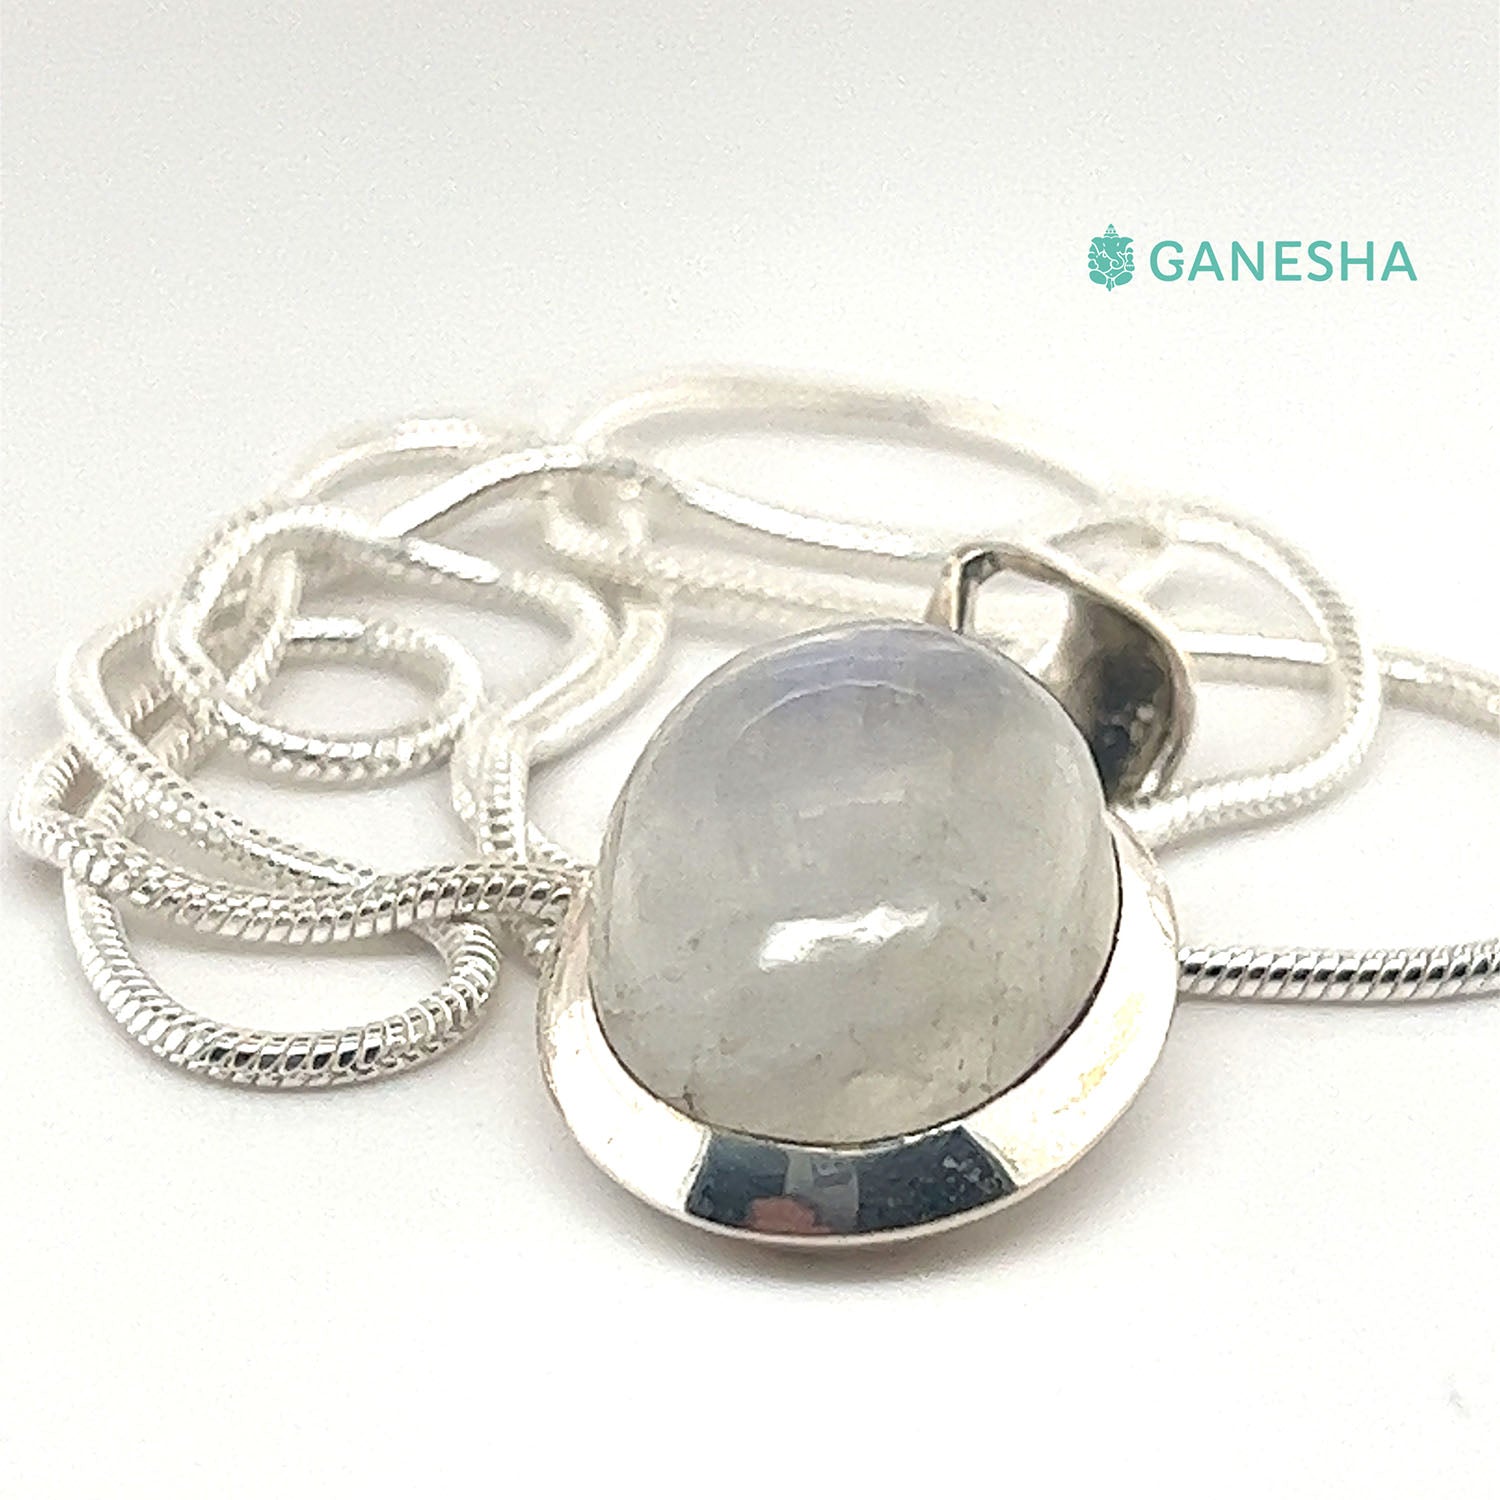 Ganesha-handicrafts-womens-moonstone-sterling-silver-jewellery-gift-with-free-chain